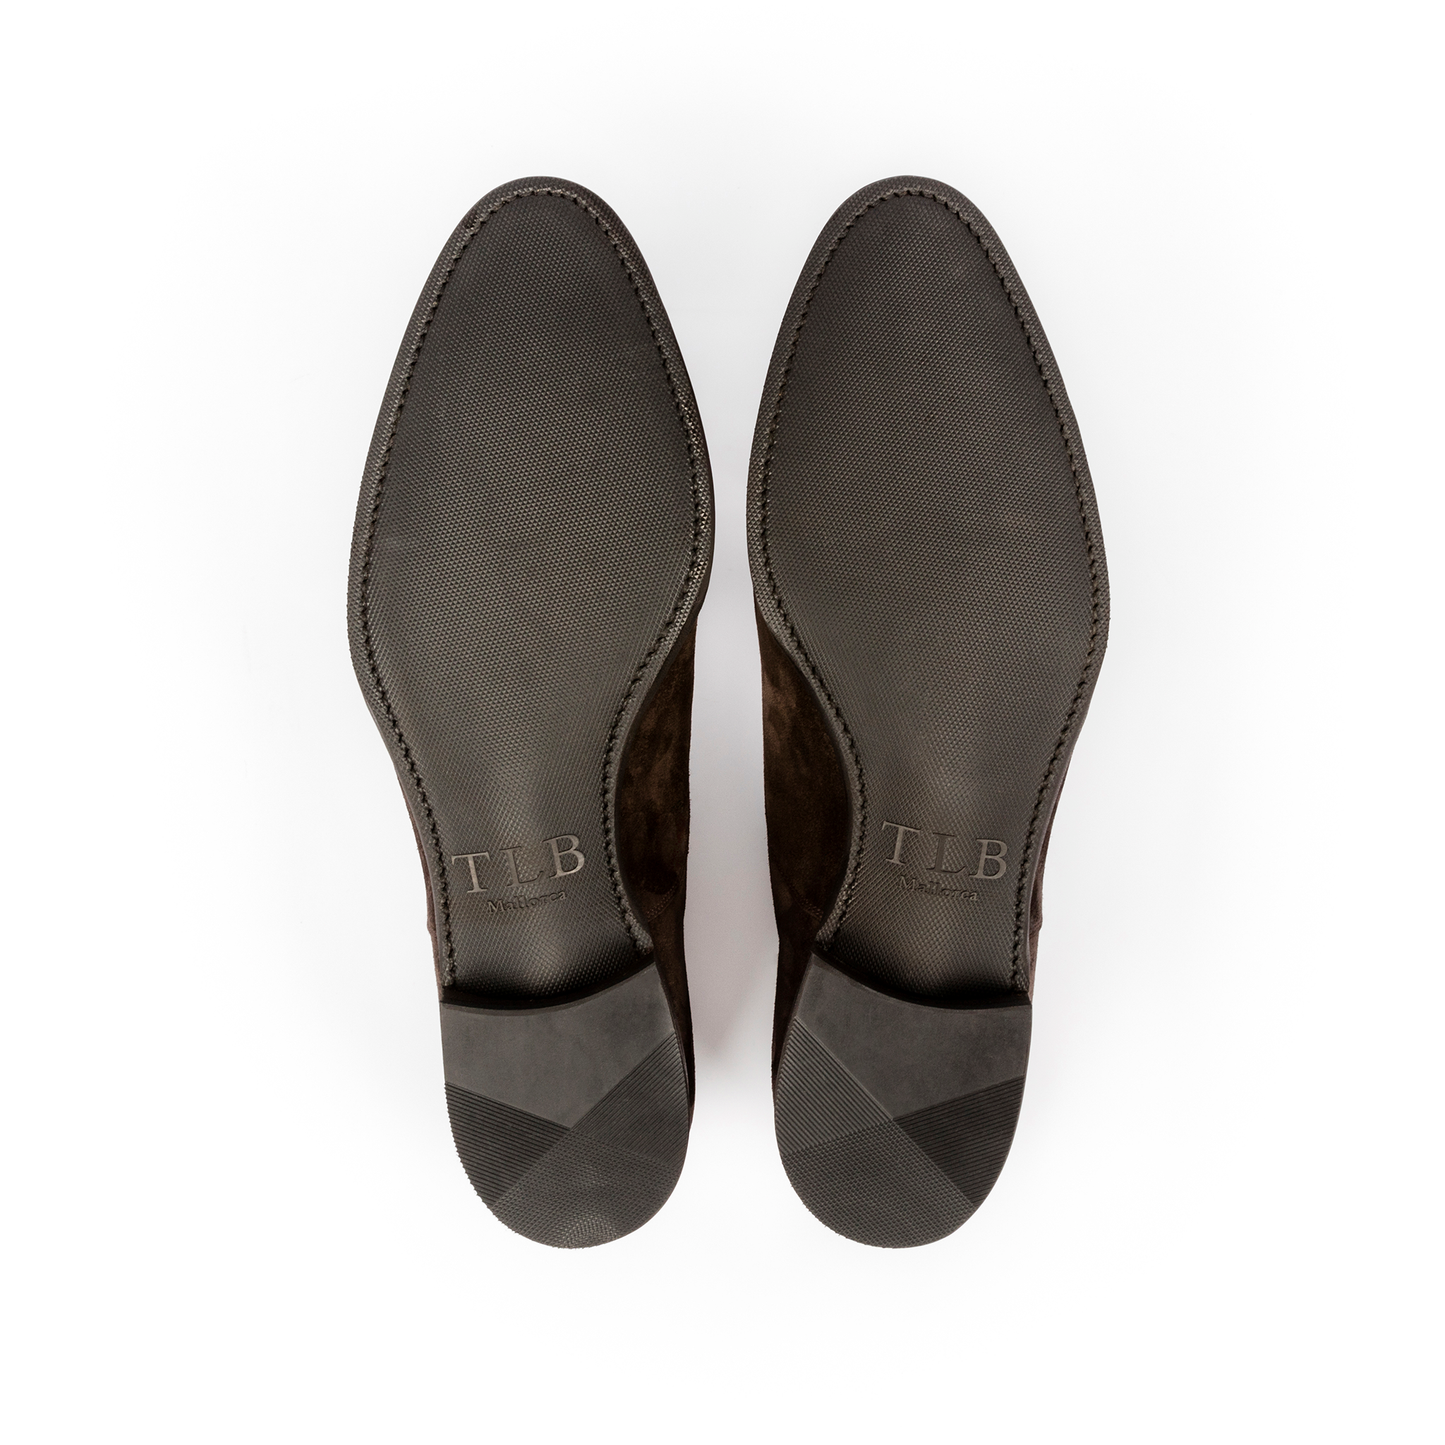 TLB Mallorca leather shoes 113 / GOYA / SUEDE BROWN